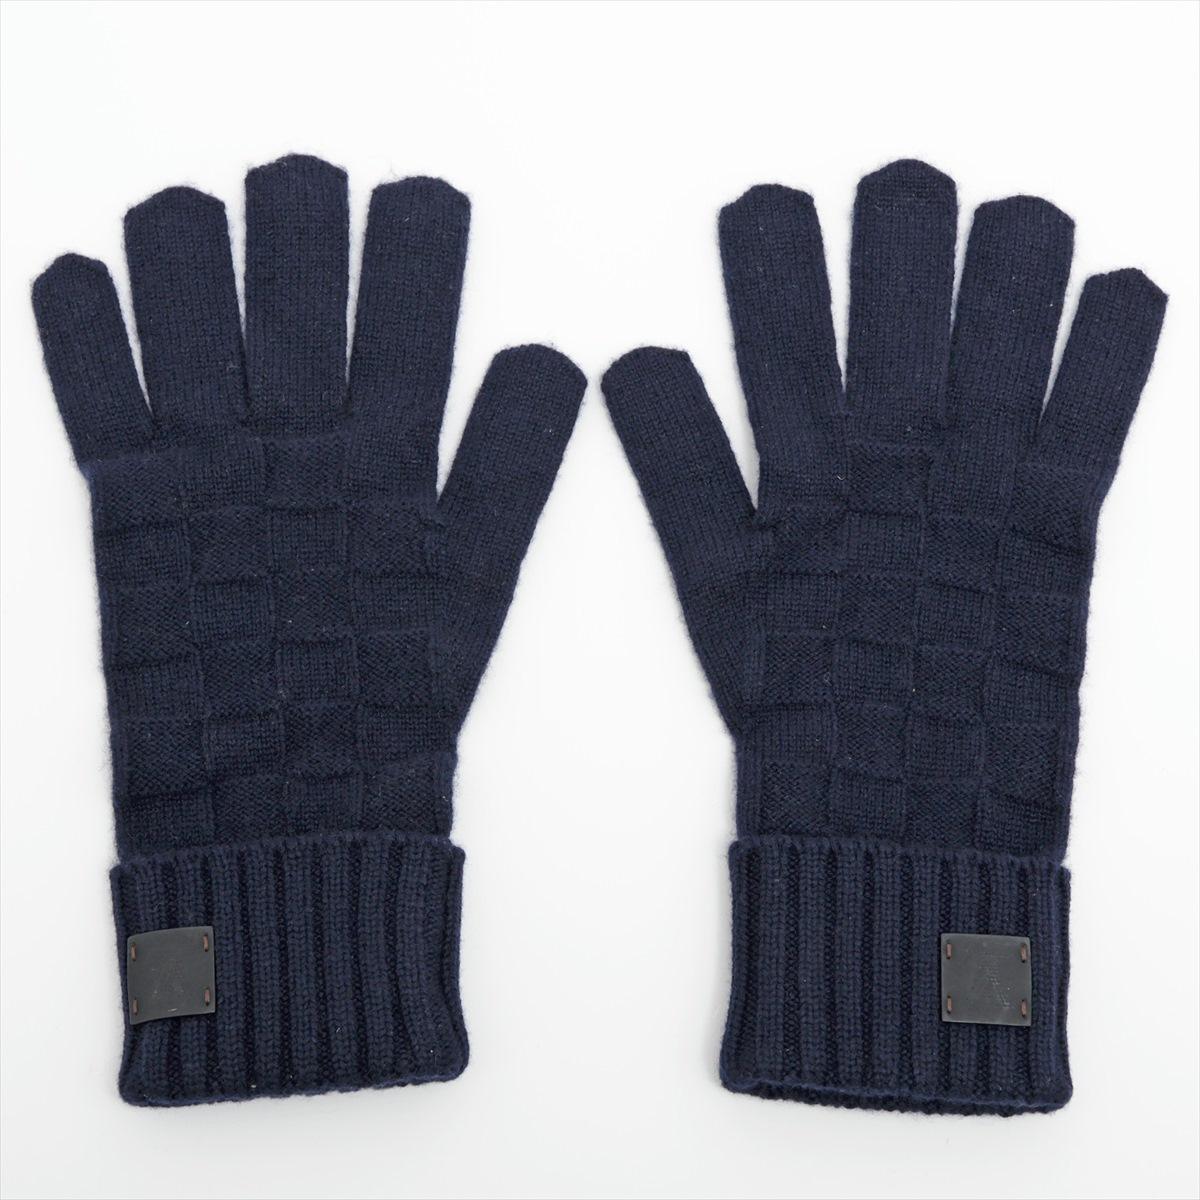 The Louis Vuitton Damier Gloves in Cashmere Navy Blue are a luxurious and stylish accessory that seamlessly blends fashion and warmth. The gloves feature an iconic Damier pattern, showcasing the timeless and recognizable design of Louis Vuitton. The